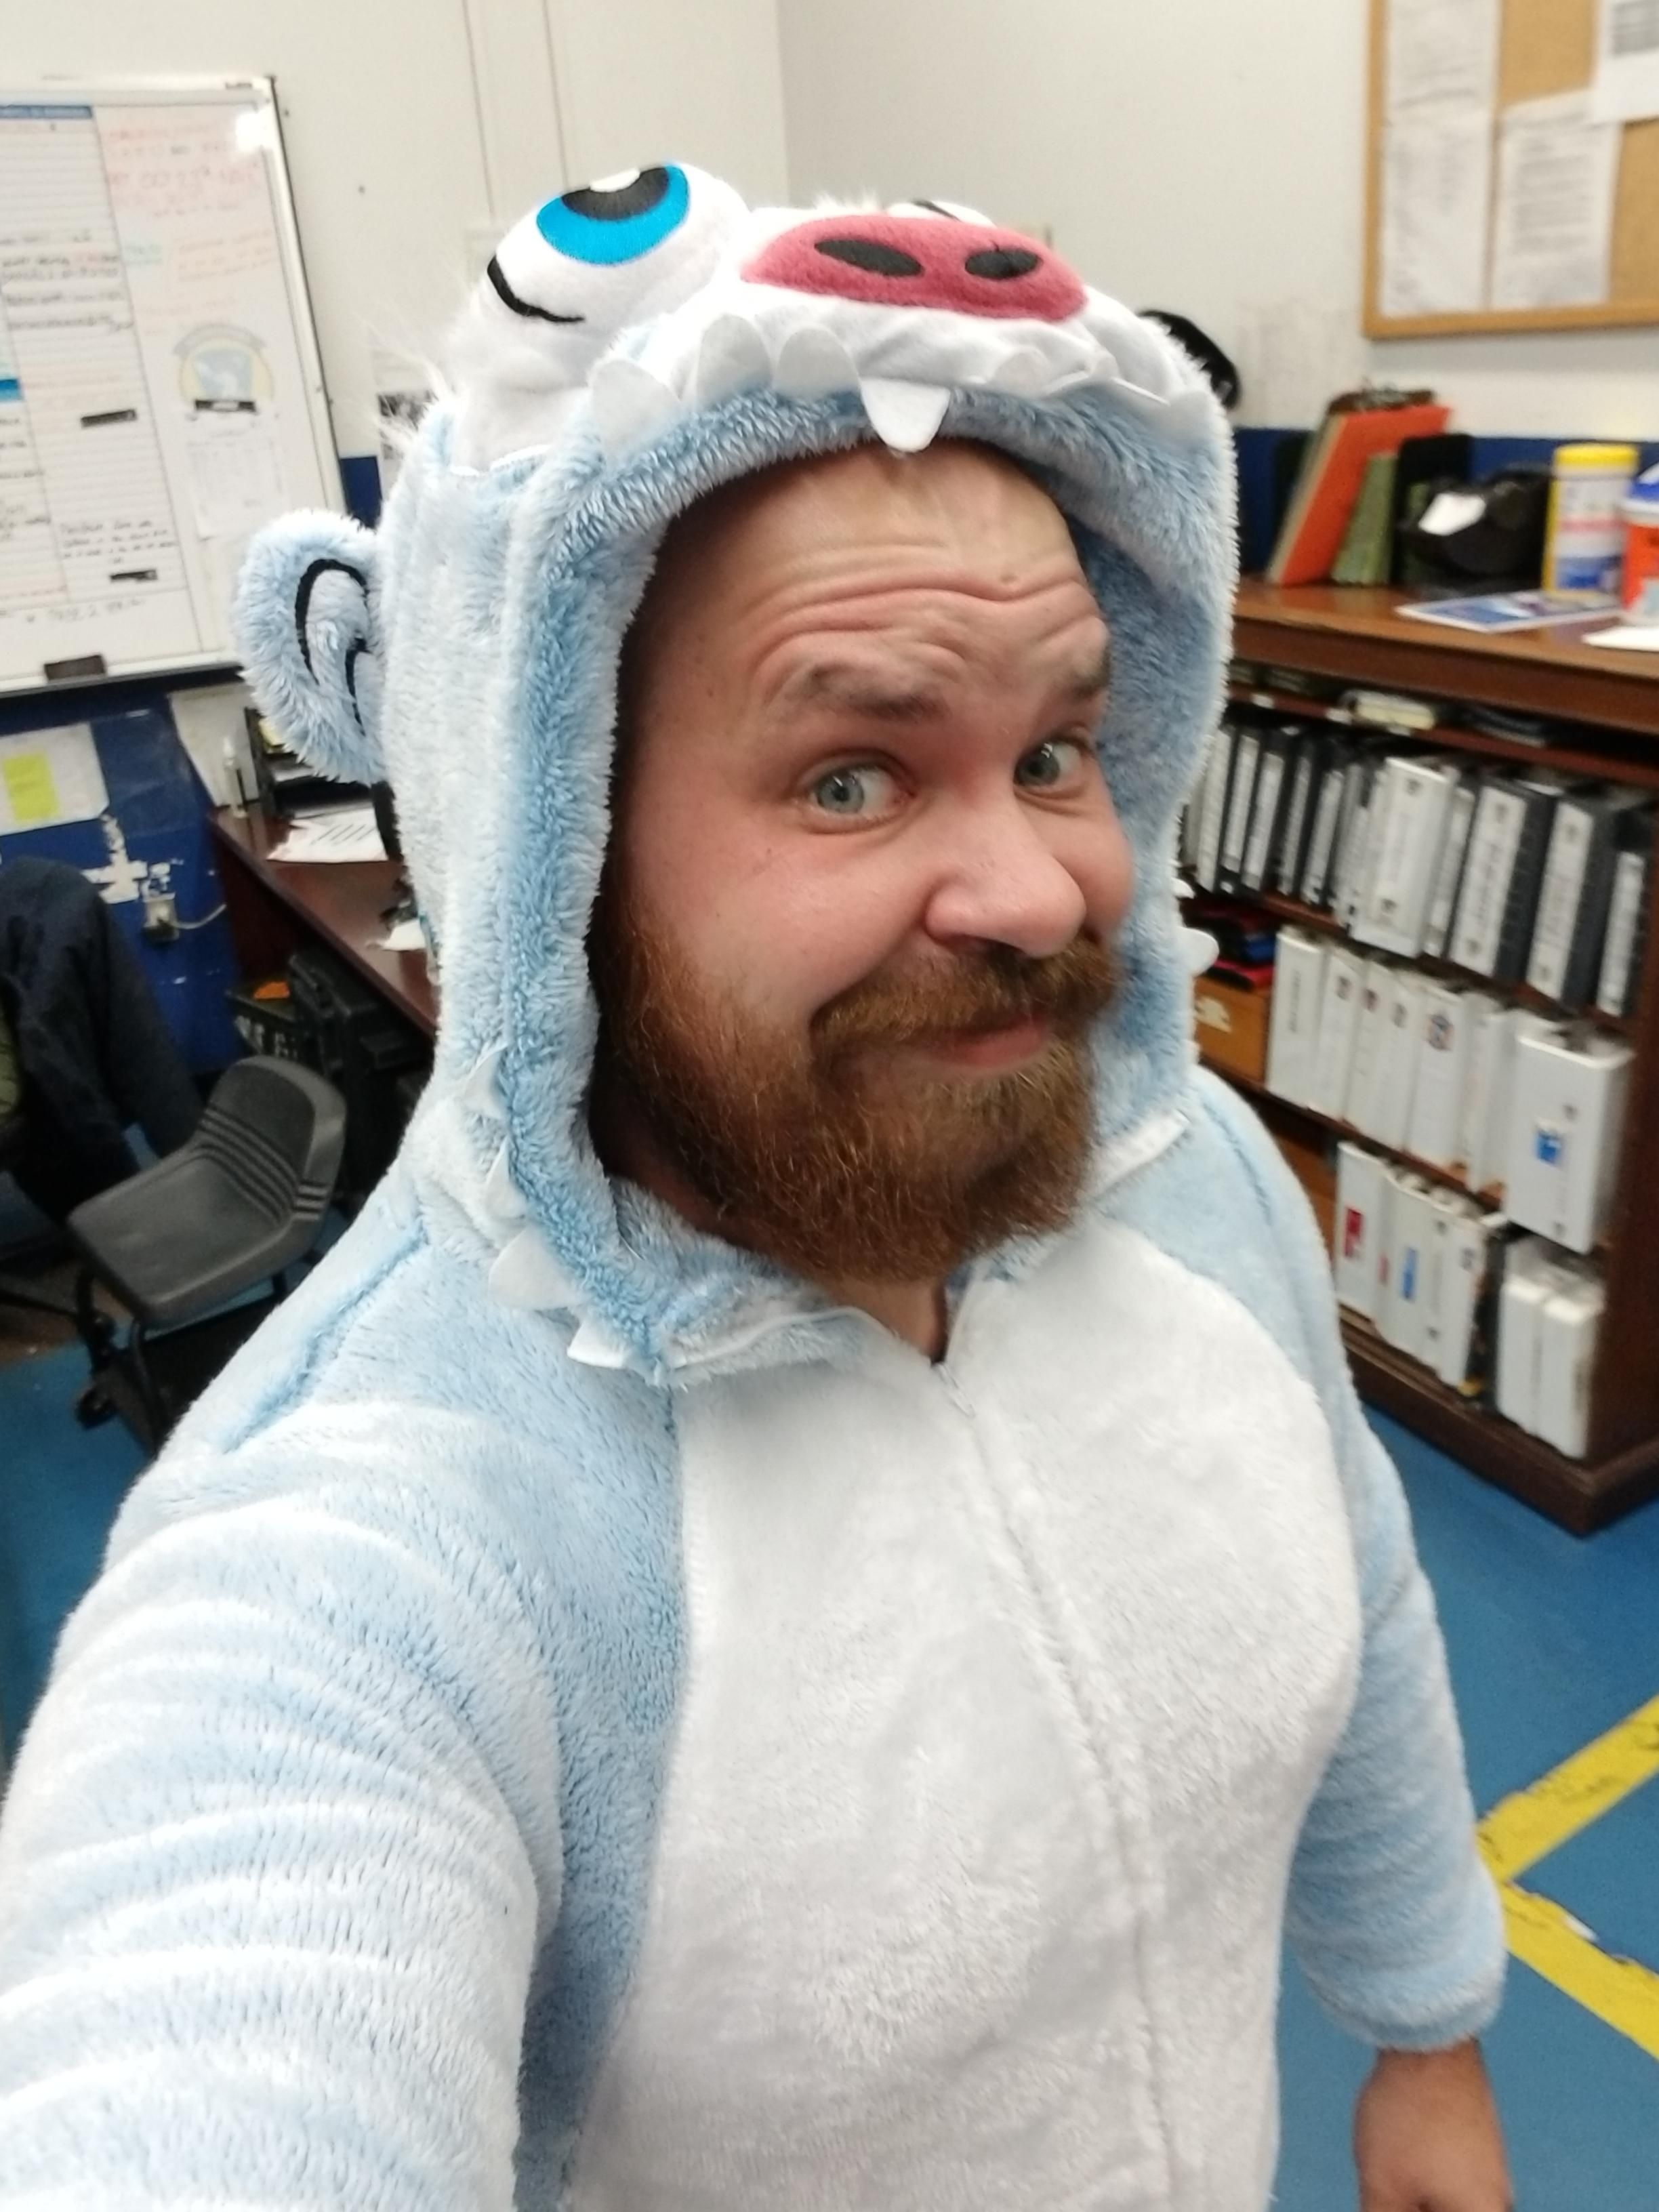 I don't know why that guy was upset. I got a Yeti Onesie, at work, for my birthday and loved it!